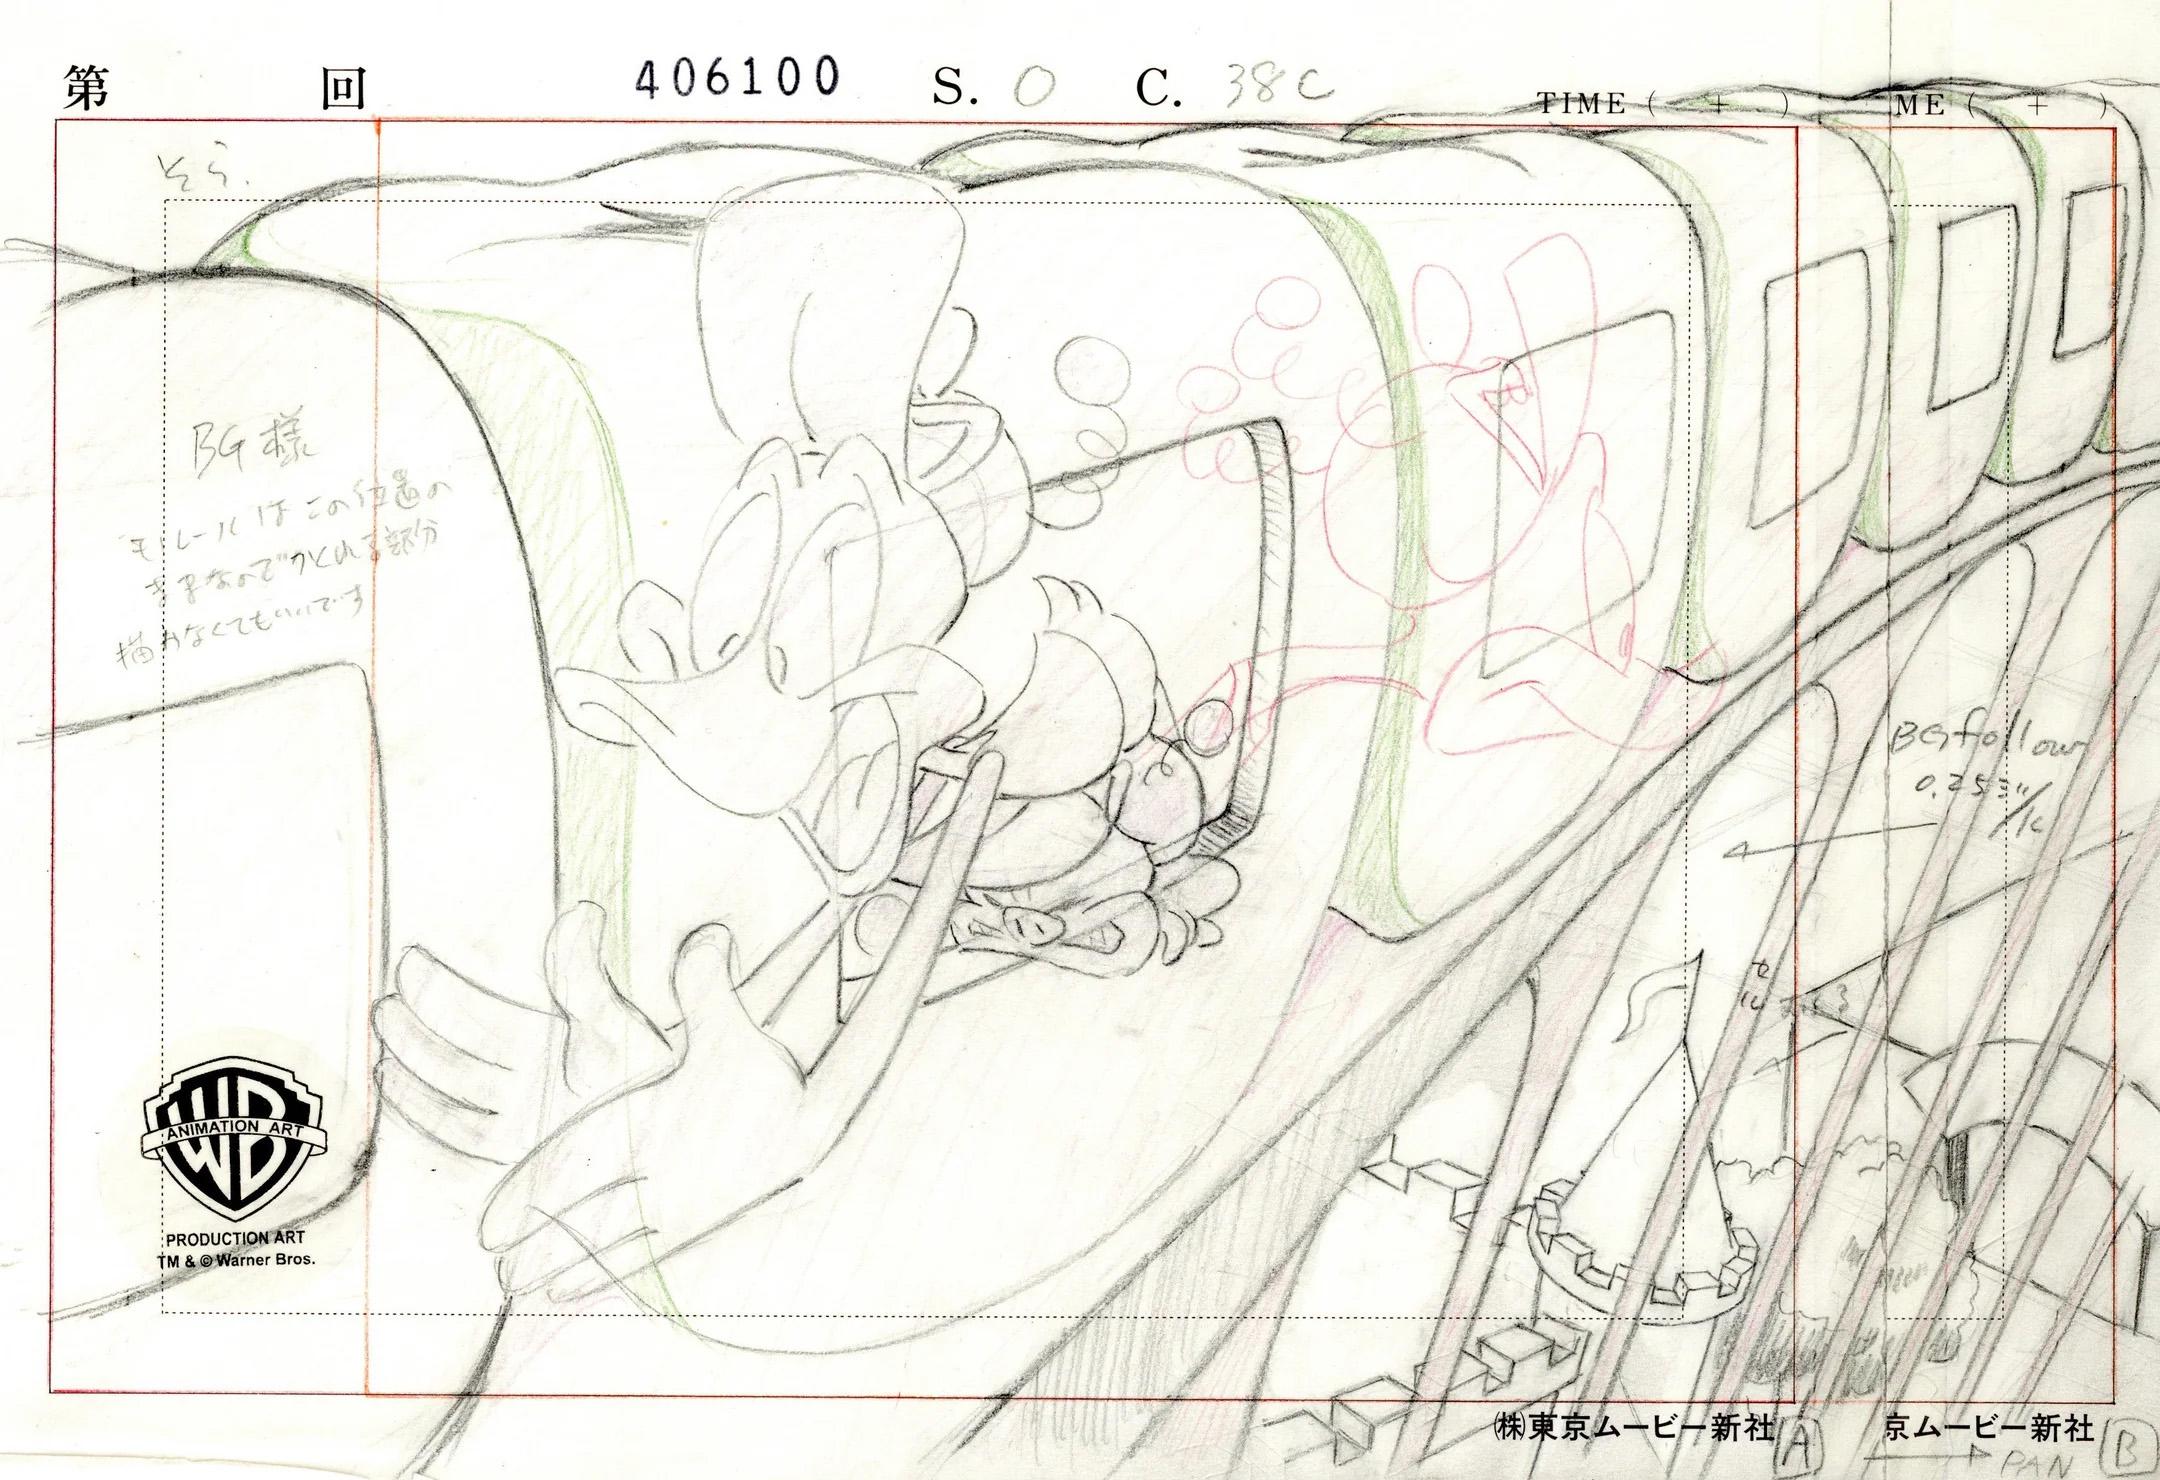 Tiny Toons Original Production Layout Drawing: Plucky Duck and Hamton - Art by Warner Bros. Studio Artists